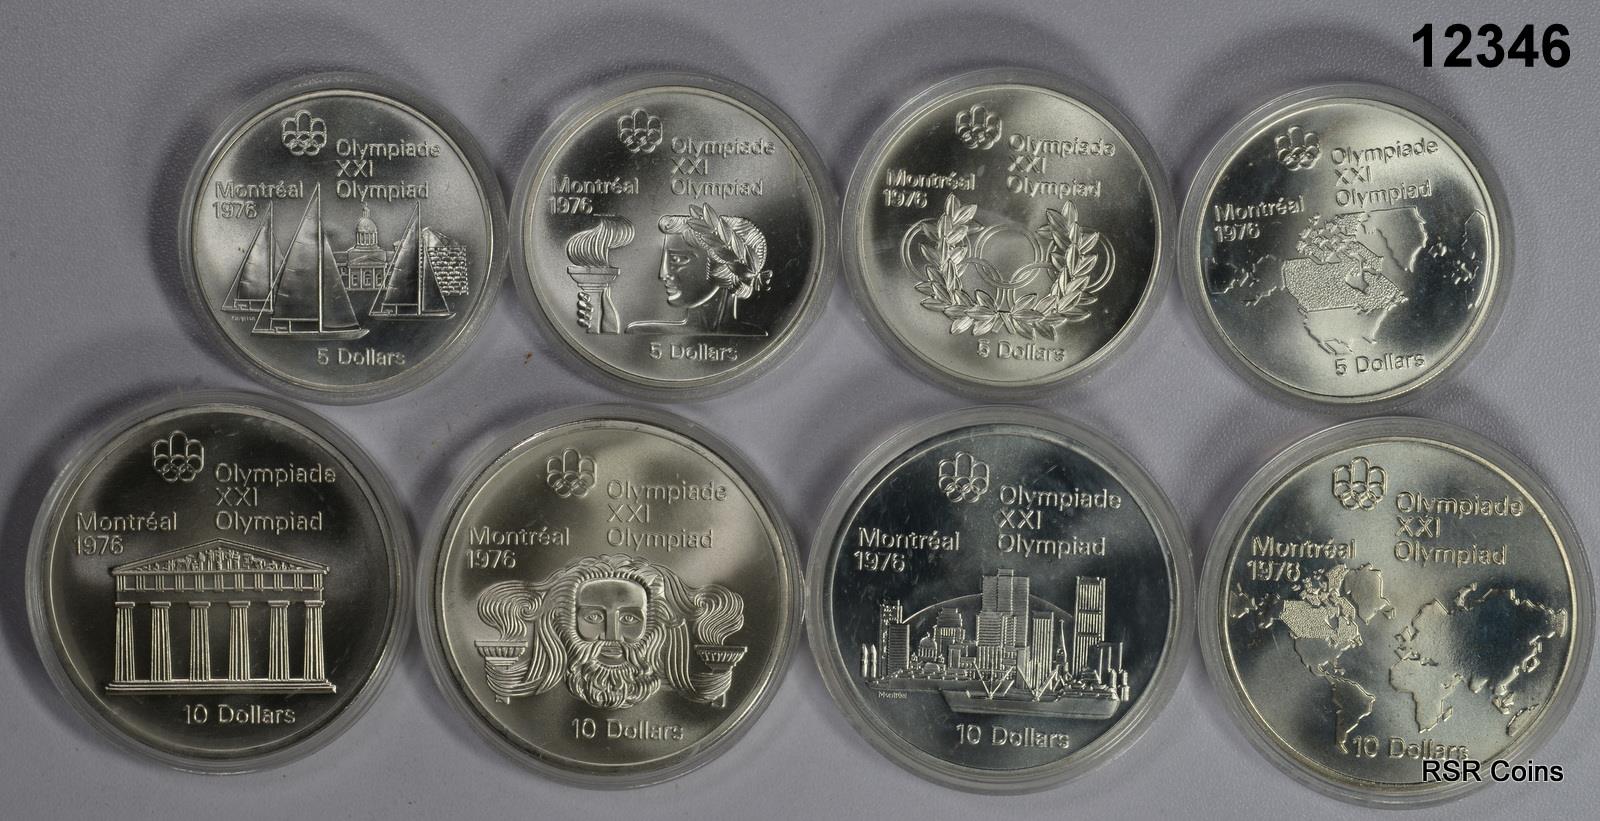 CANADA 4 $10 4 $5 GEM BU STERLING SILVER COIN SET IN CAPSULES OVER 9OZ!! #12346